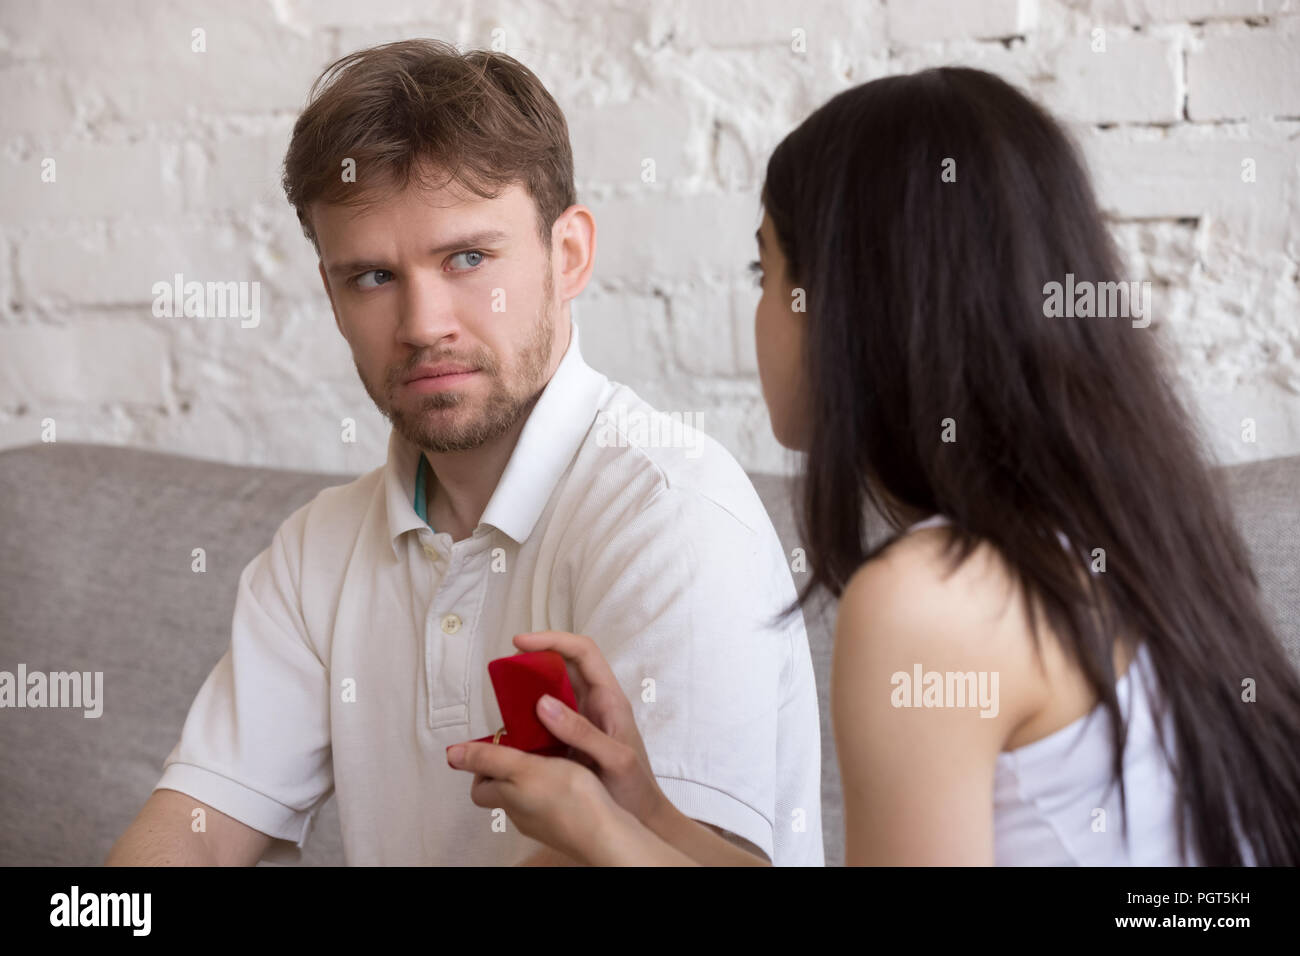 Decisive woman asking puzzled lover to marry her Stock Photo